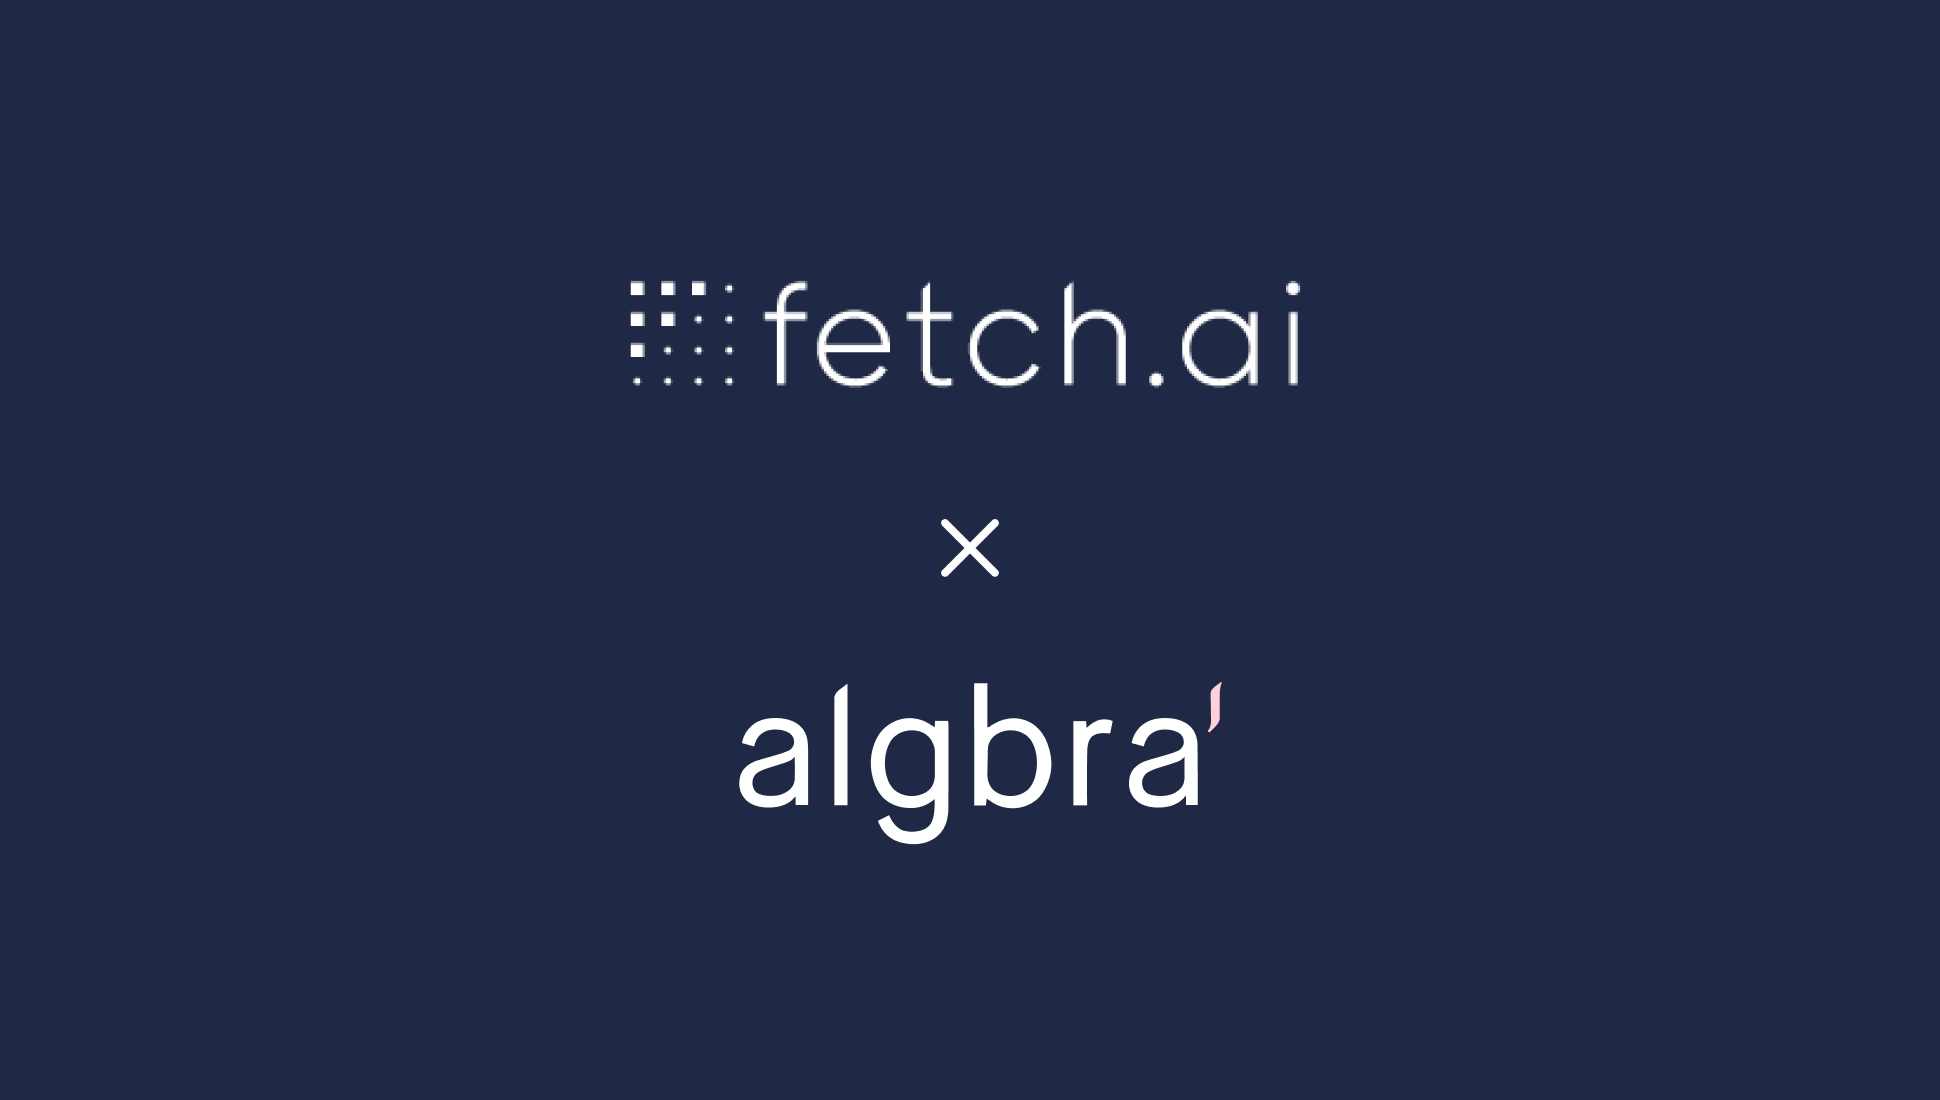 Fetch.ai Partners with Algbra, Bridging AI and Blockchain with Banking Solutions for Ethical Finance and Minority Communities